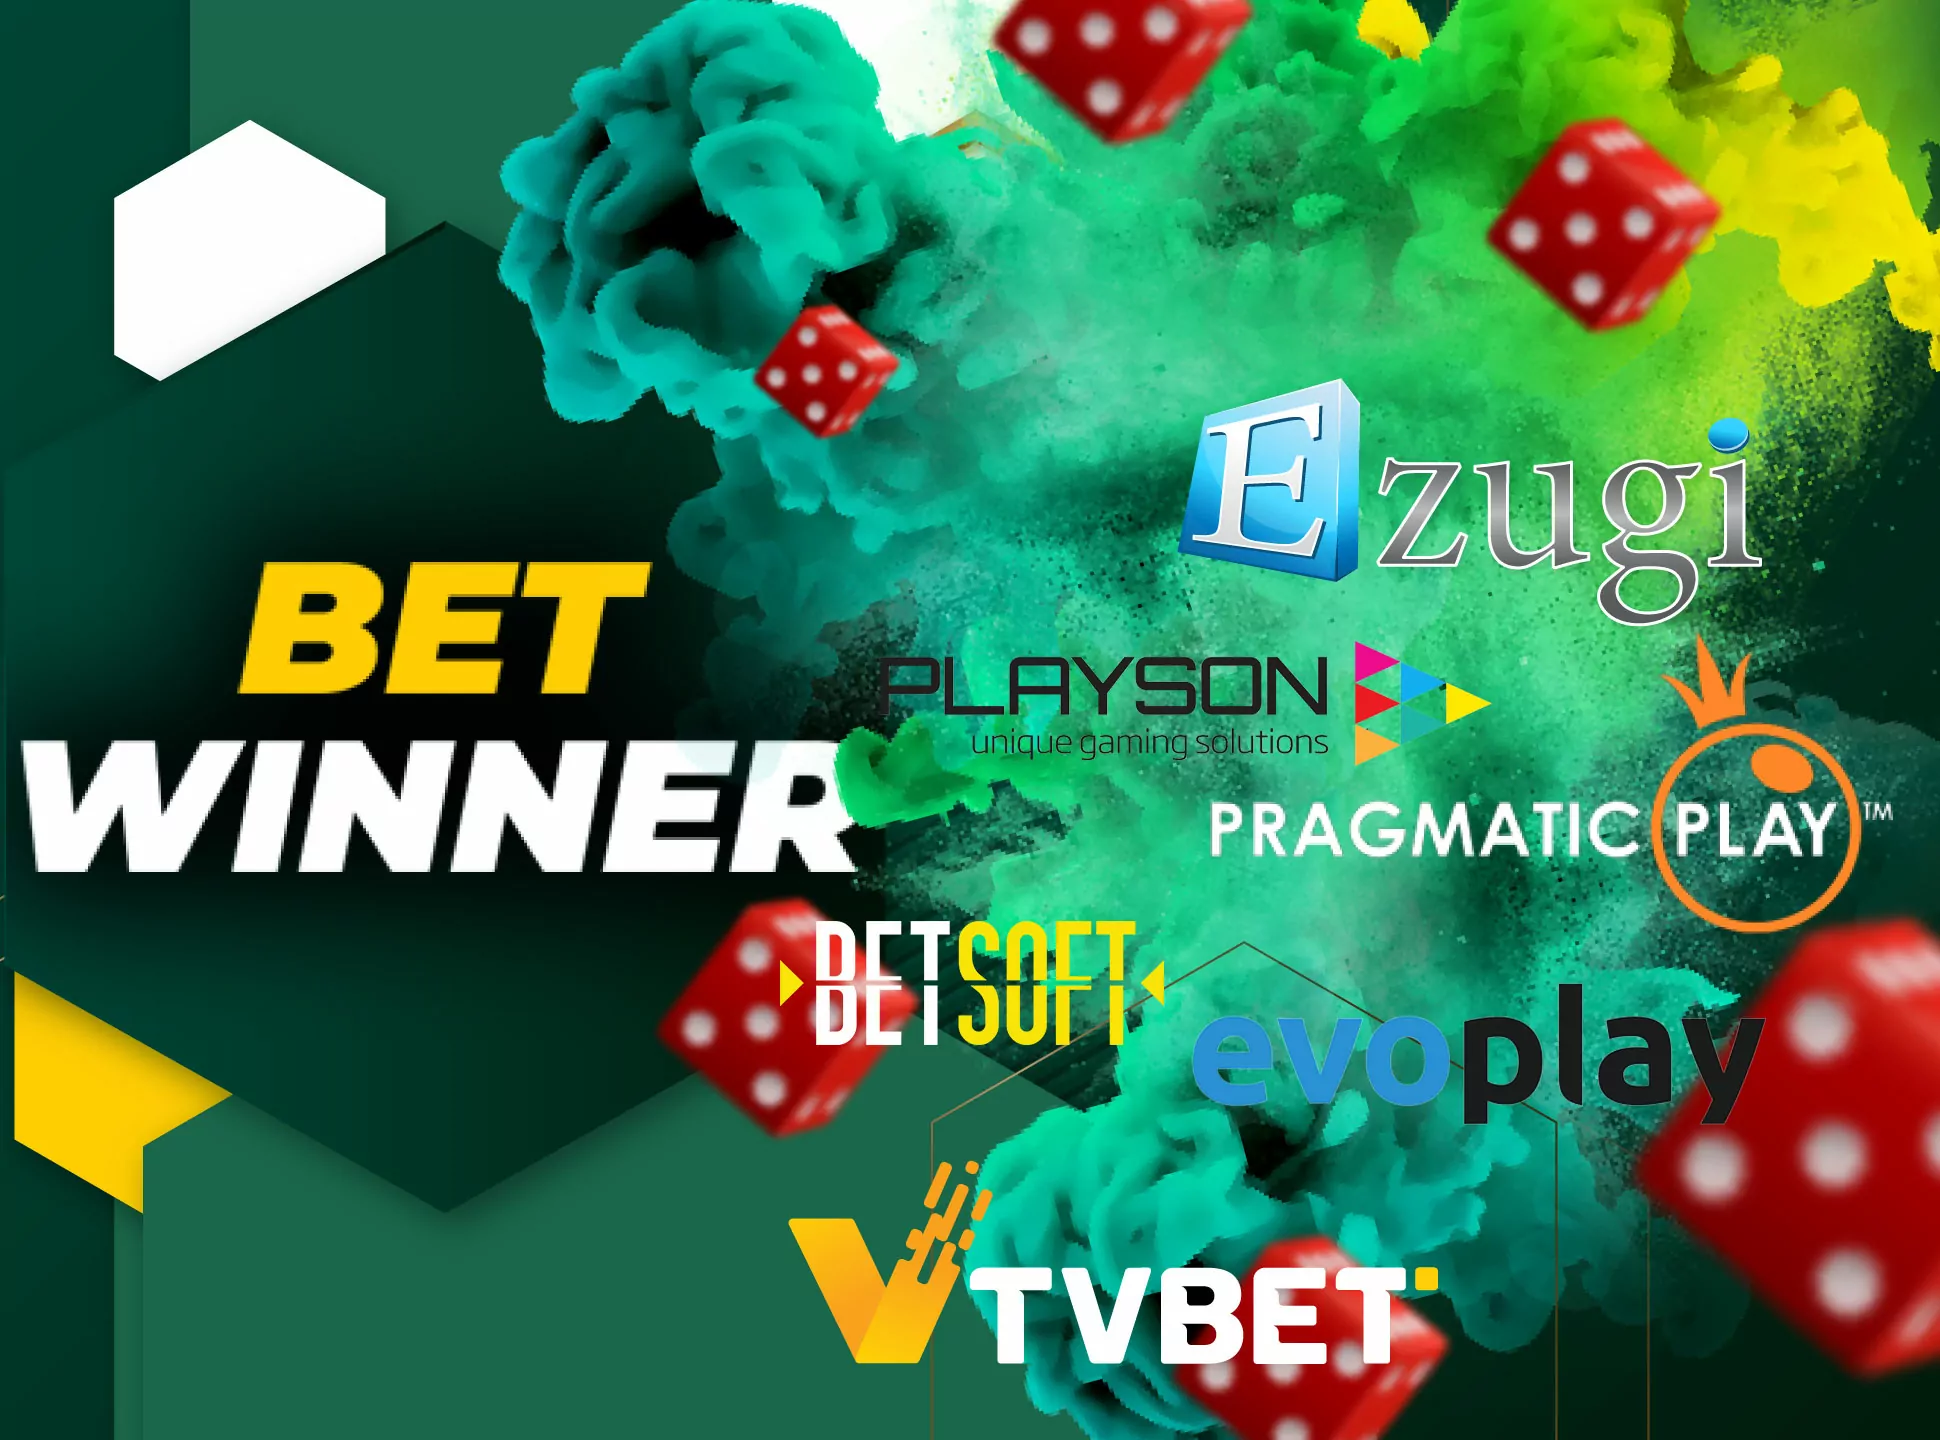 Learn more about Betwinner games providers.